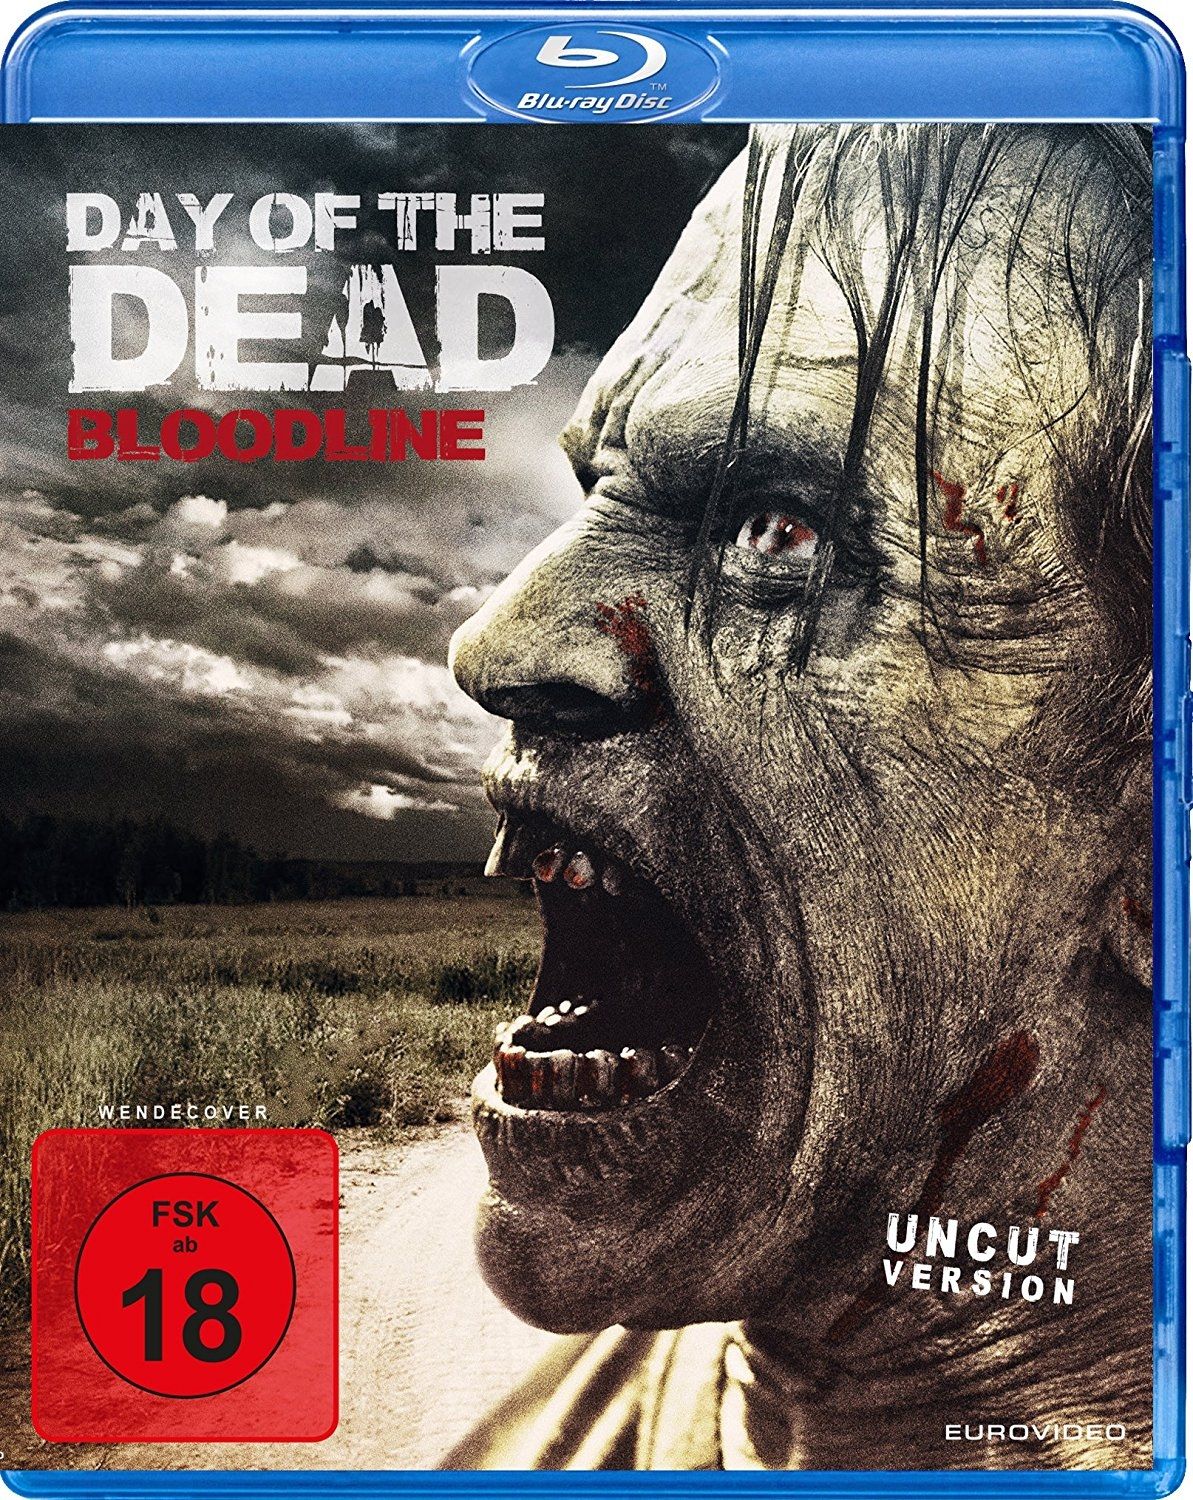 Day of the Dead - Bloodline (BLURAY)